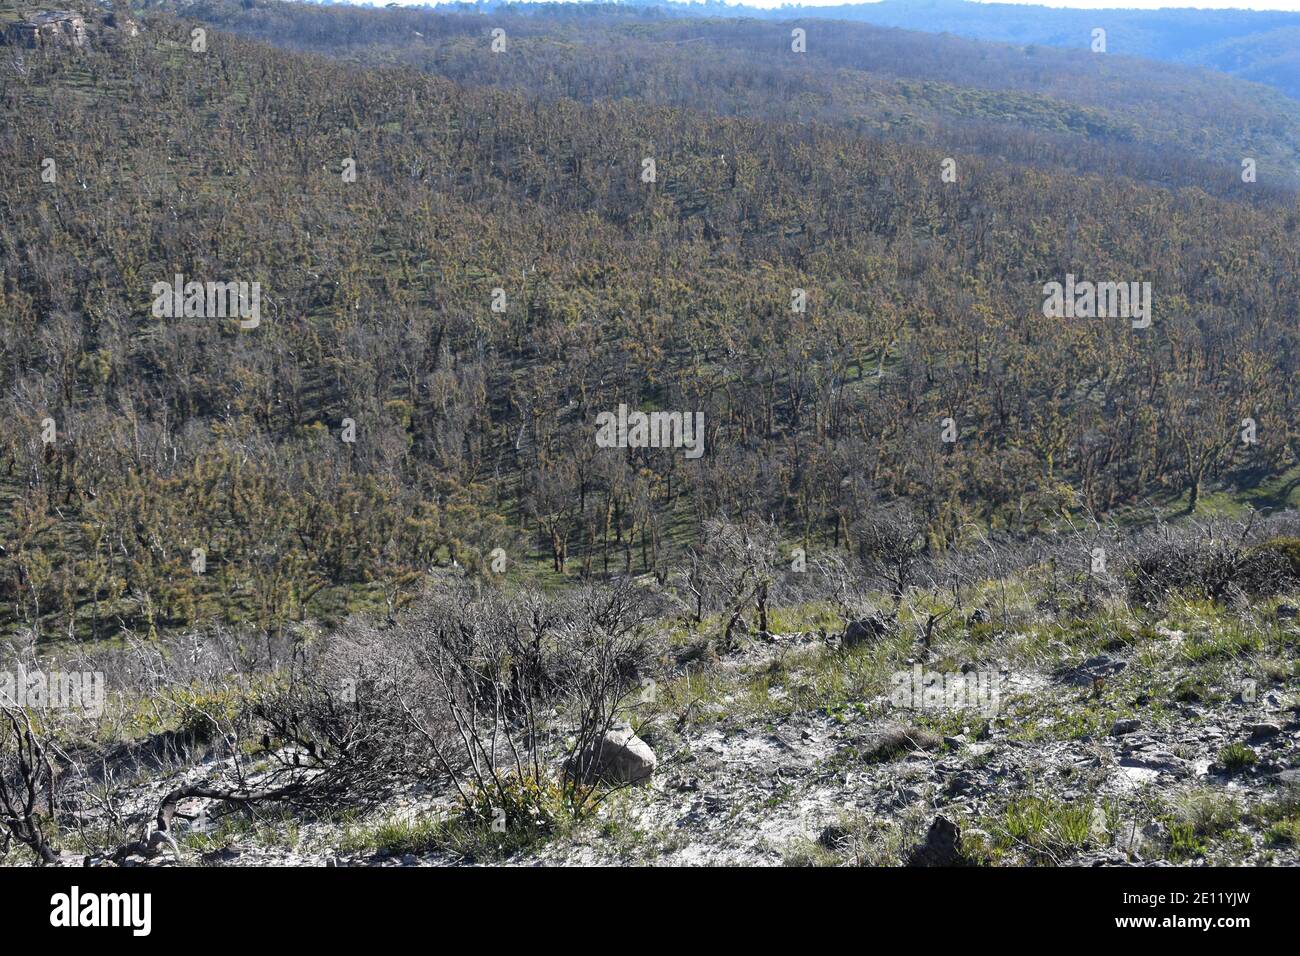 mountains and valleys with burnt shrubbery after the forest fires in the blue mountains Australia. Stock Photo